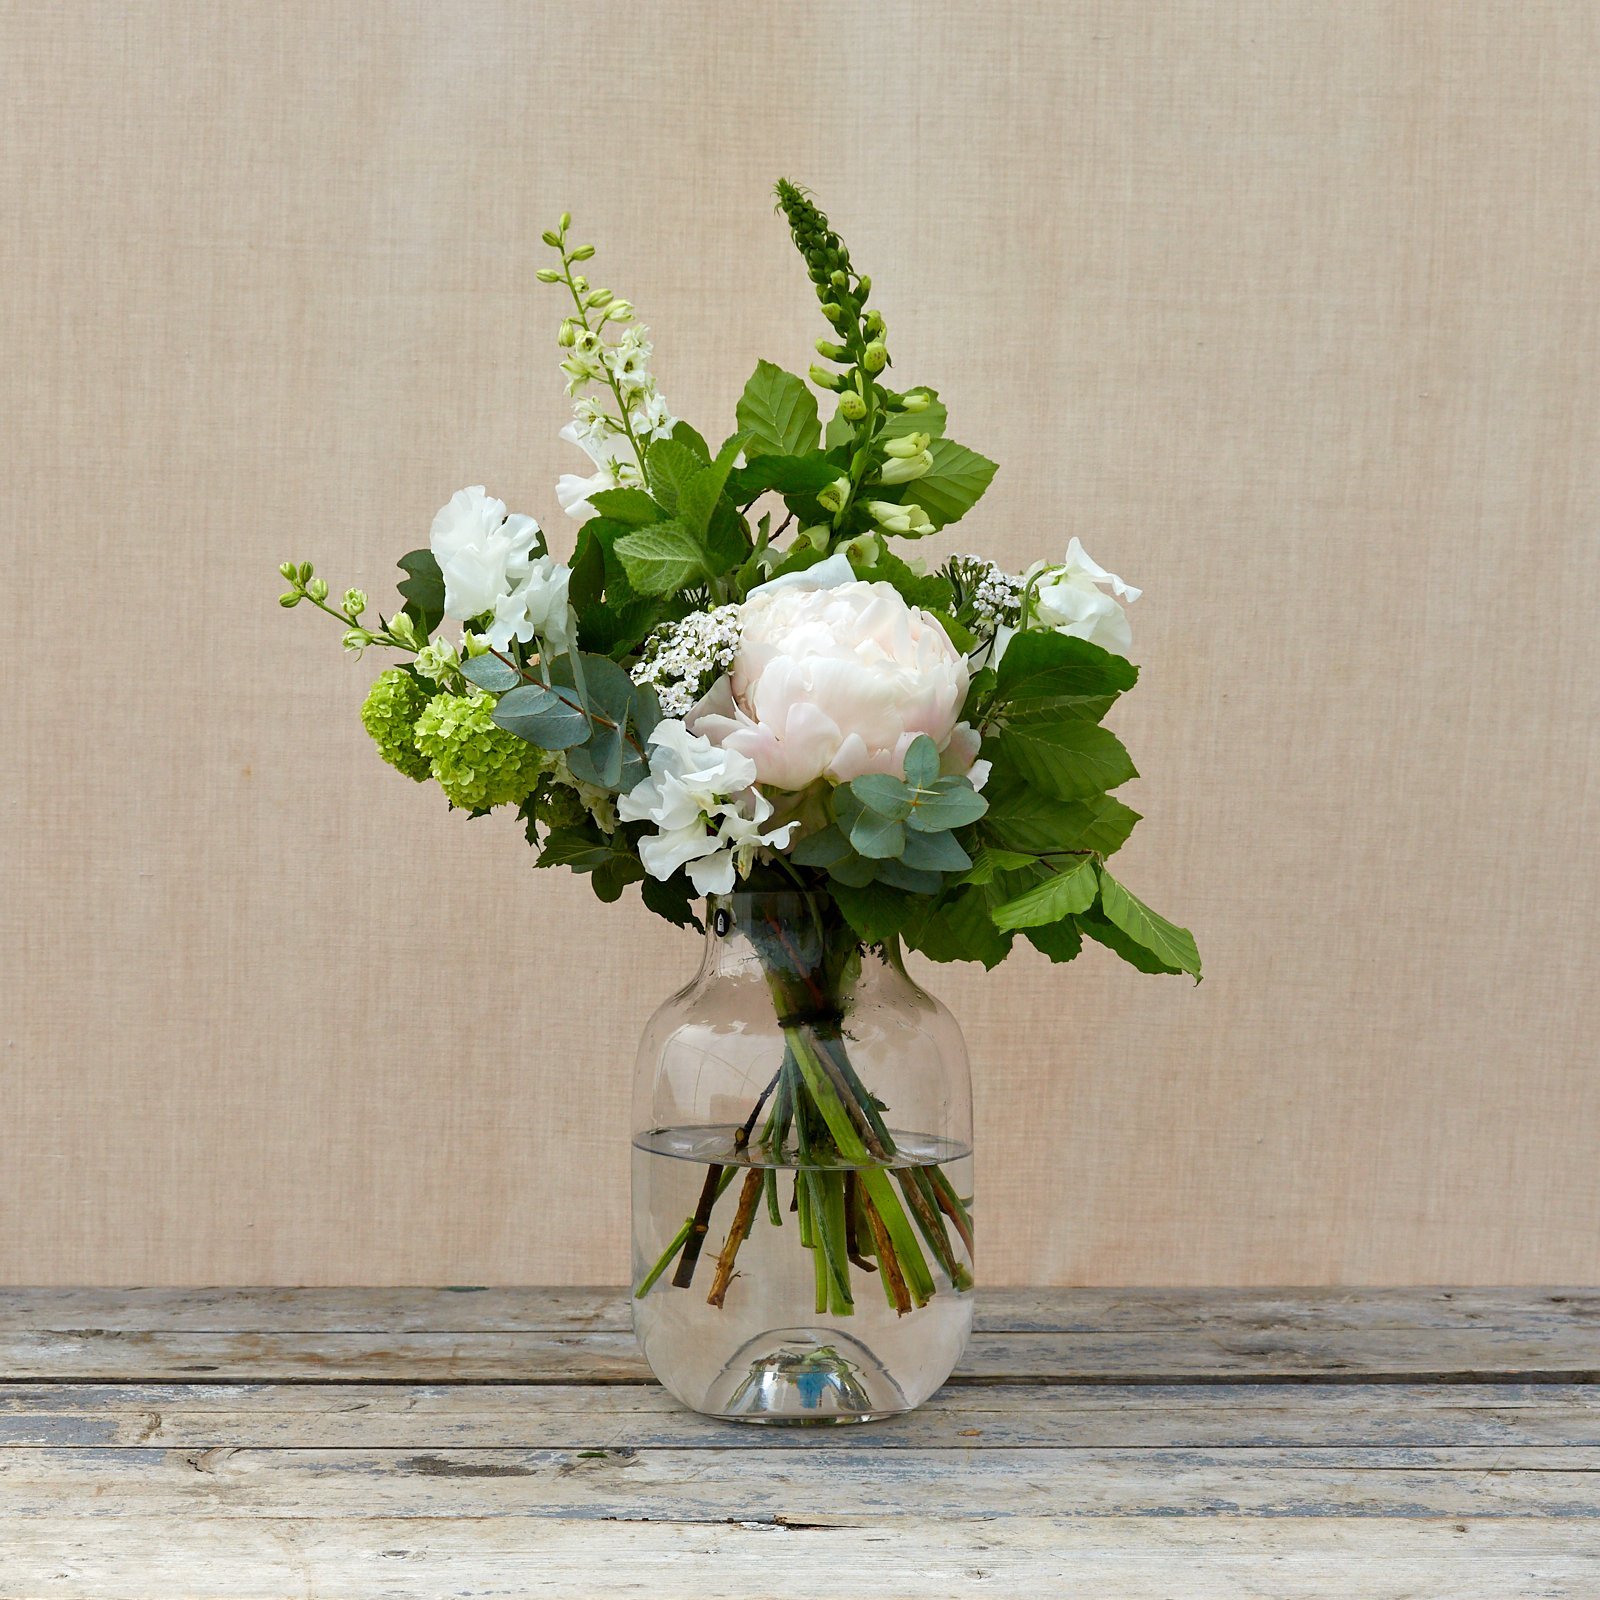 Monthly Flower Hand Tie Subscription - from £25